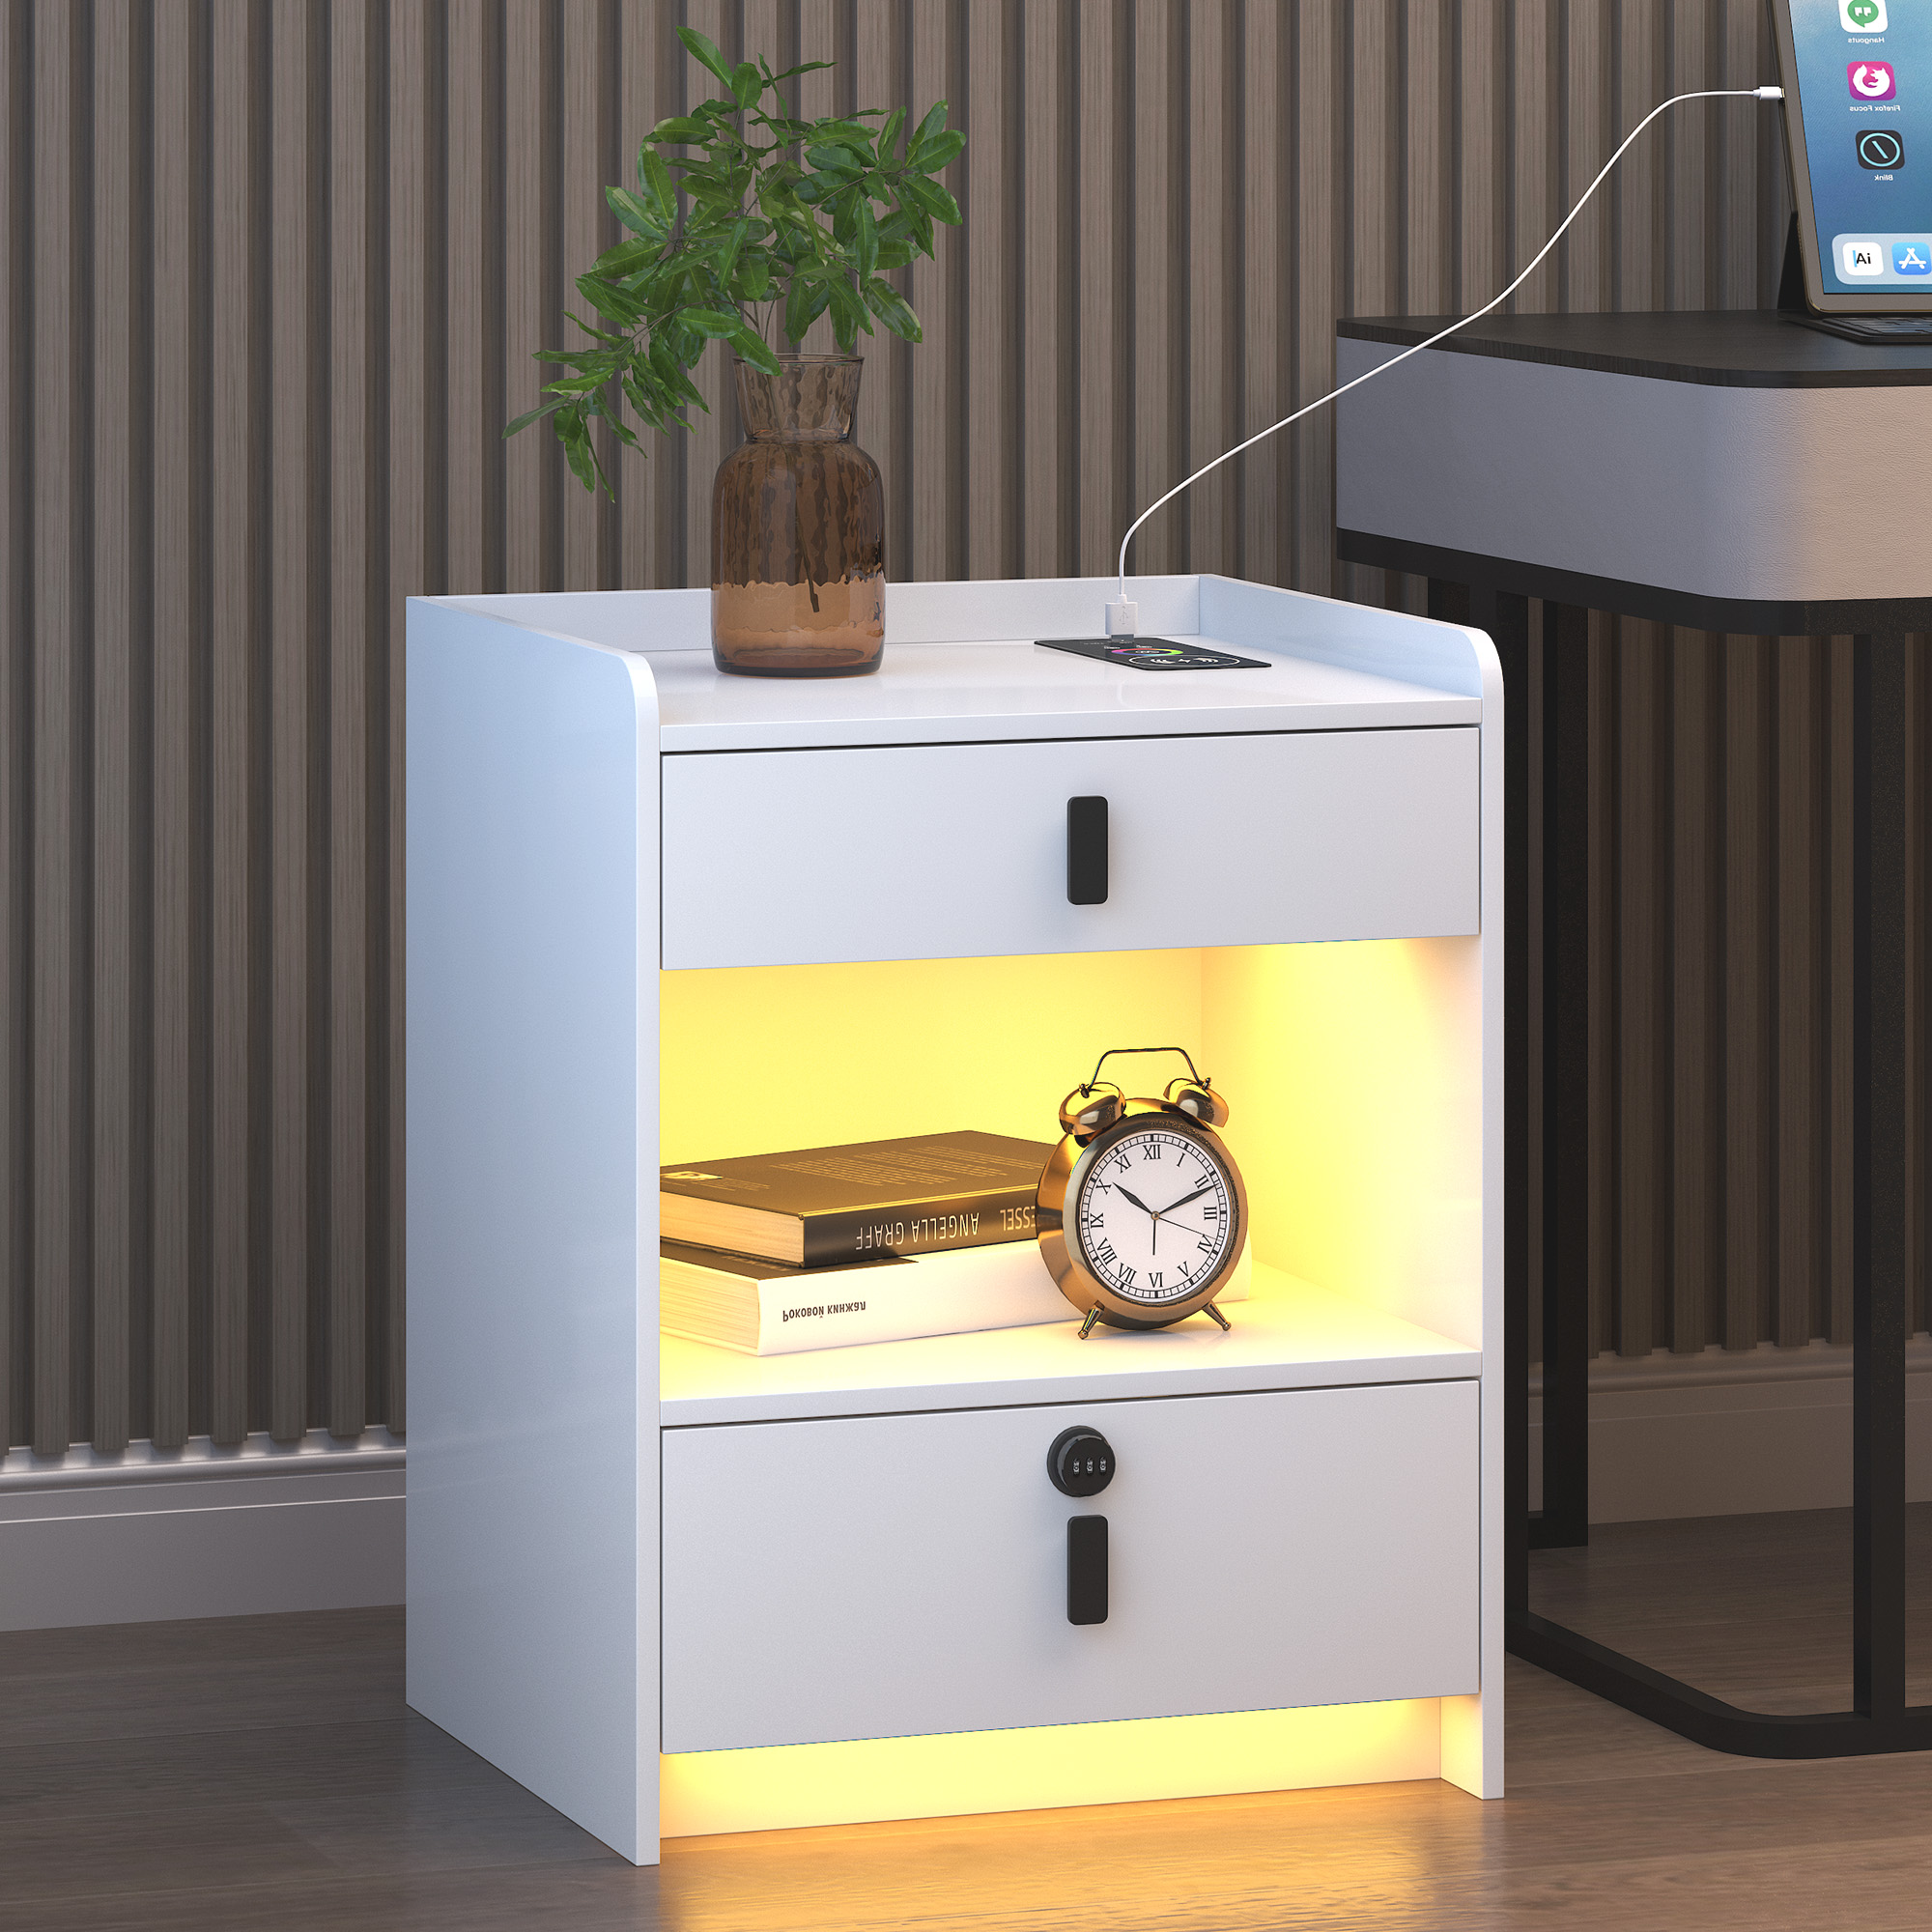 LVSOMT Led Light Nightstands With 2 Large Drawers 2 Use Ports 1 Shelf